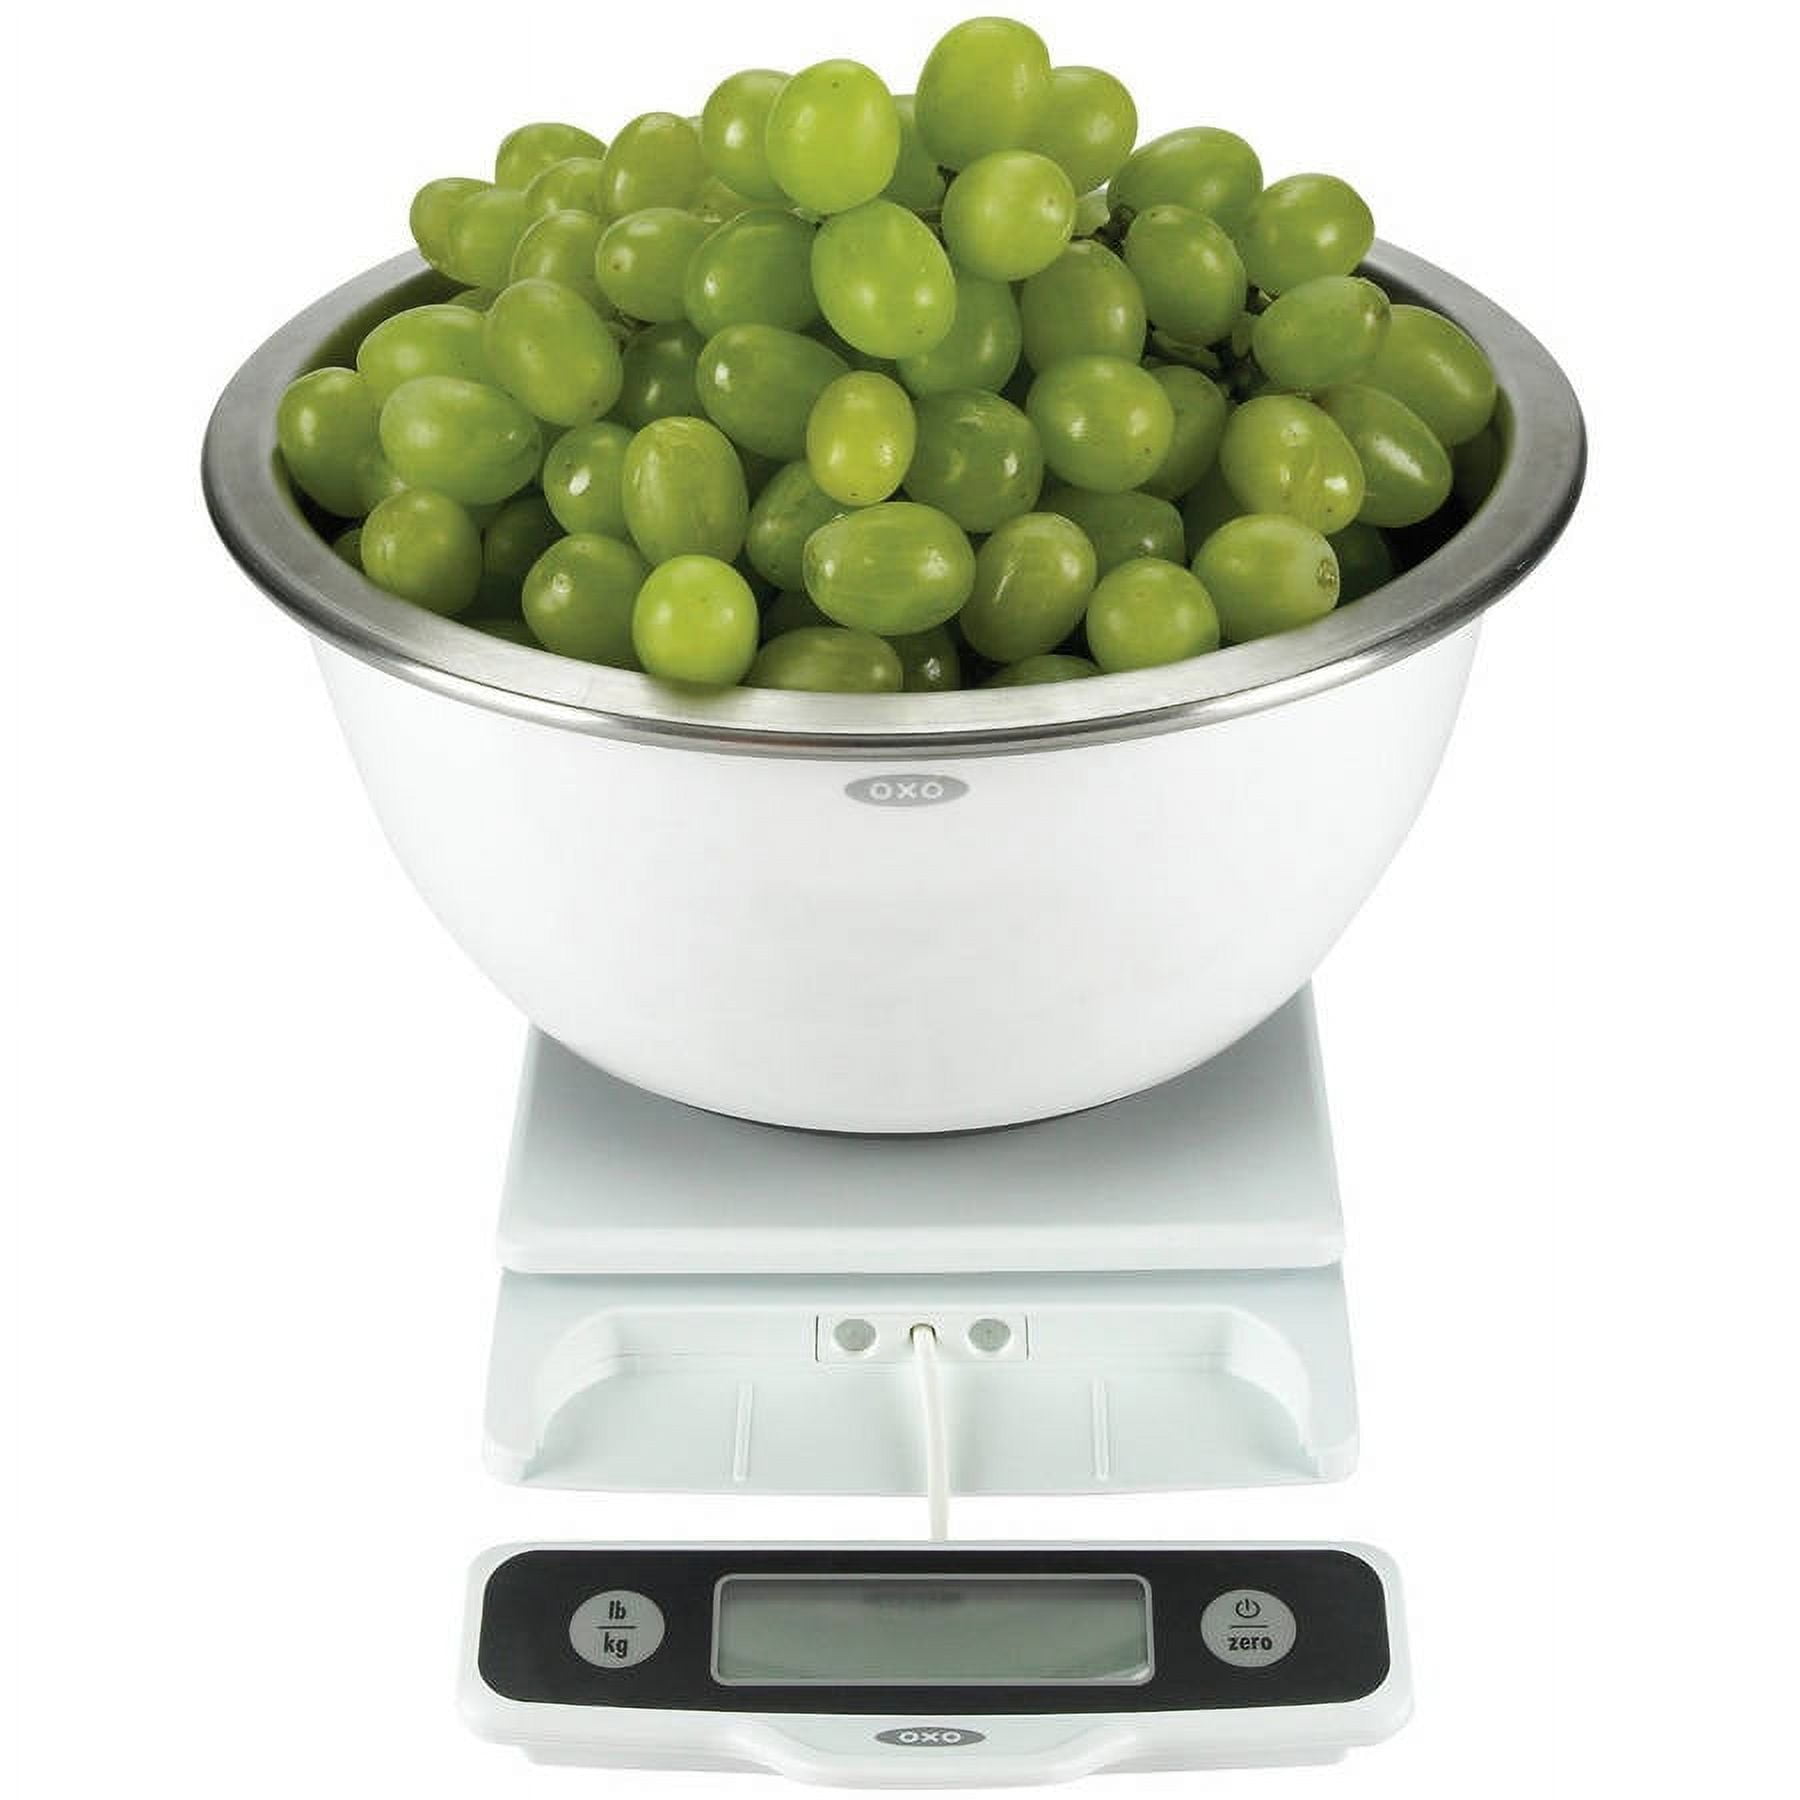 NEW OXO Good Grips 5 LB Food Scale w/Pull-Out Display, Black NIB Fast  Shipping!